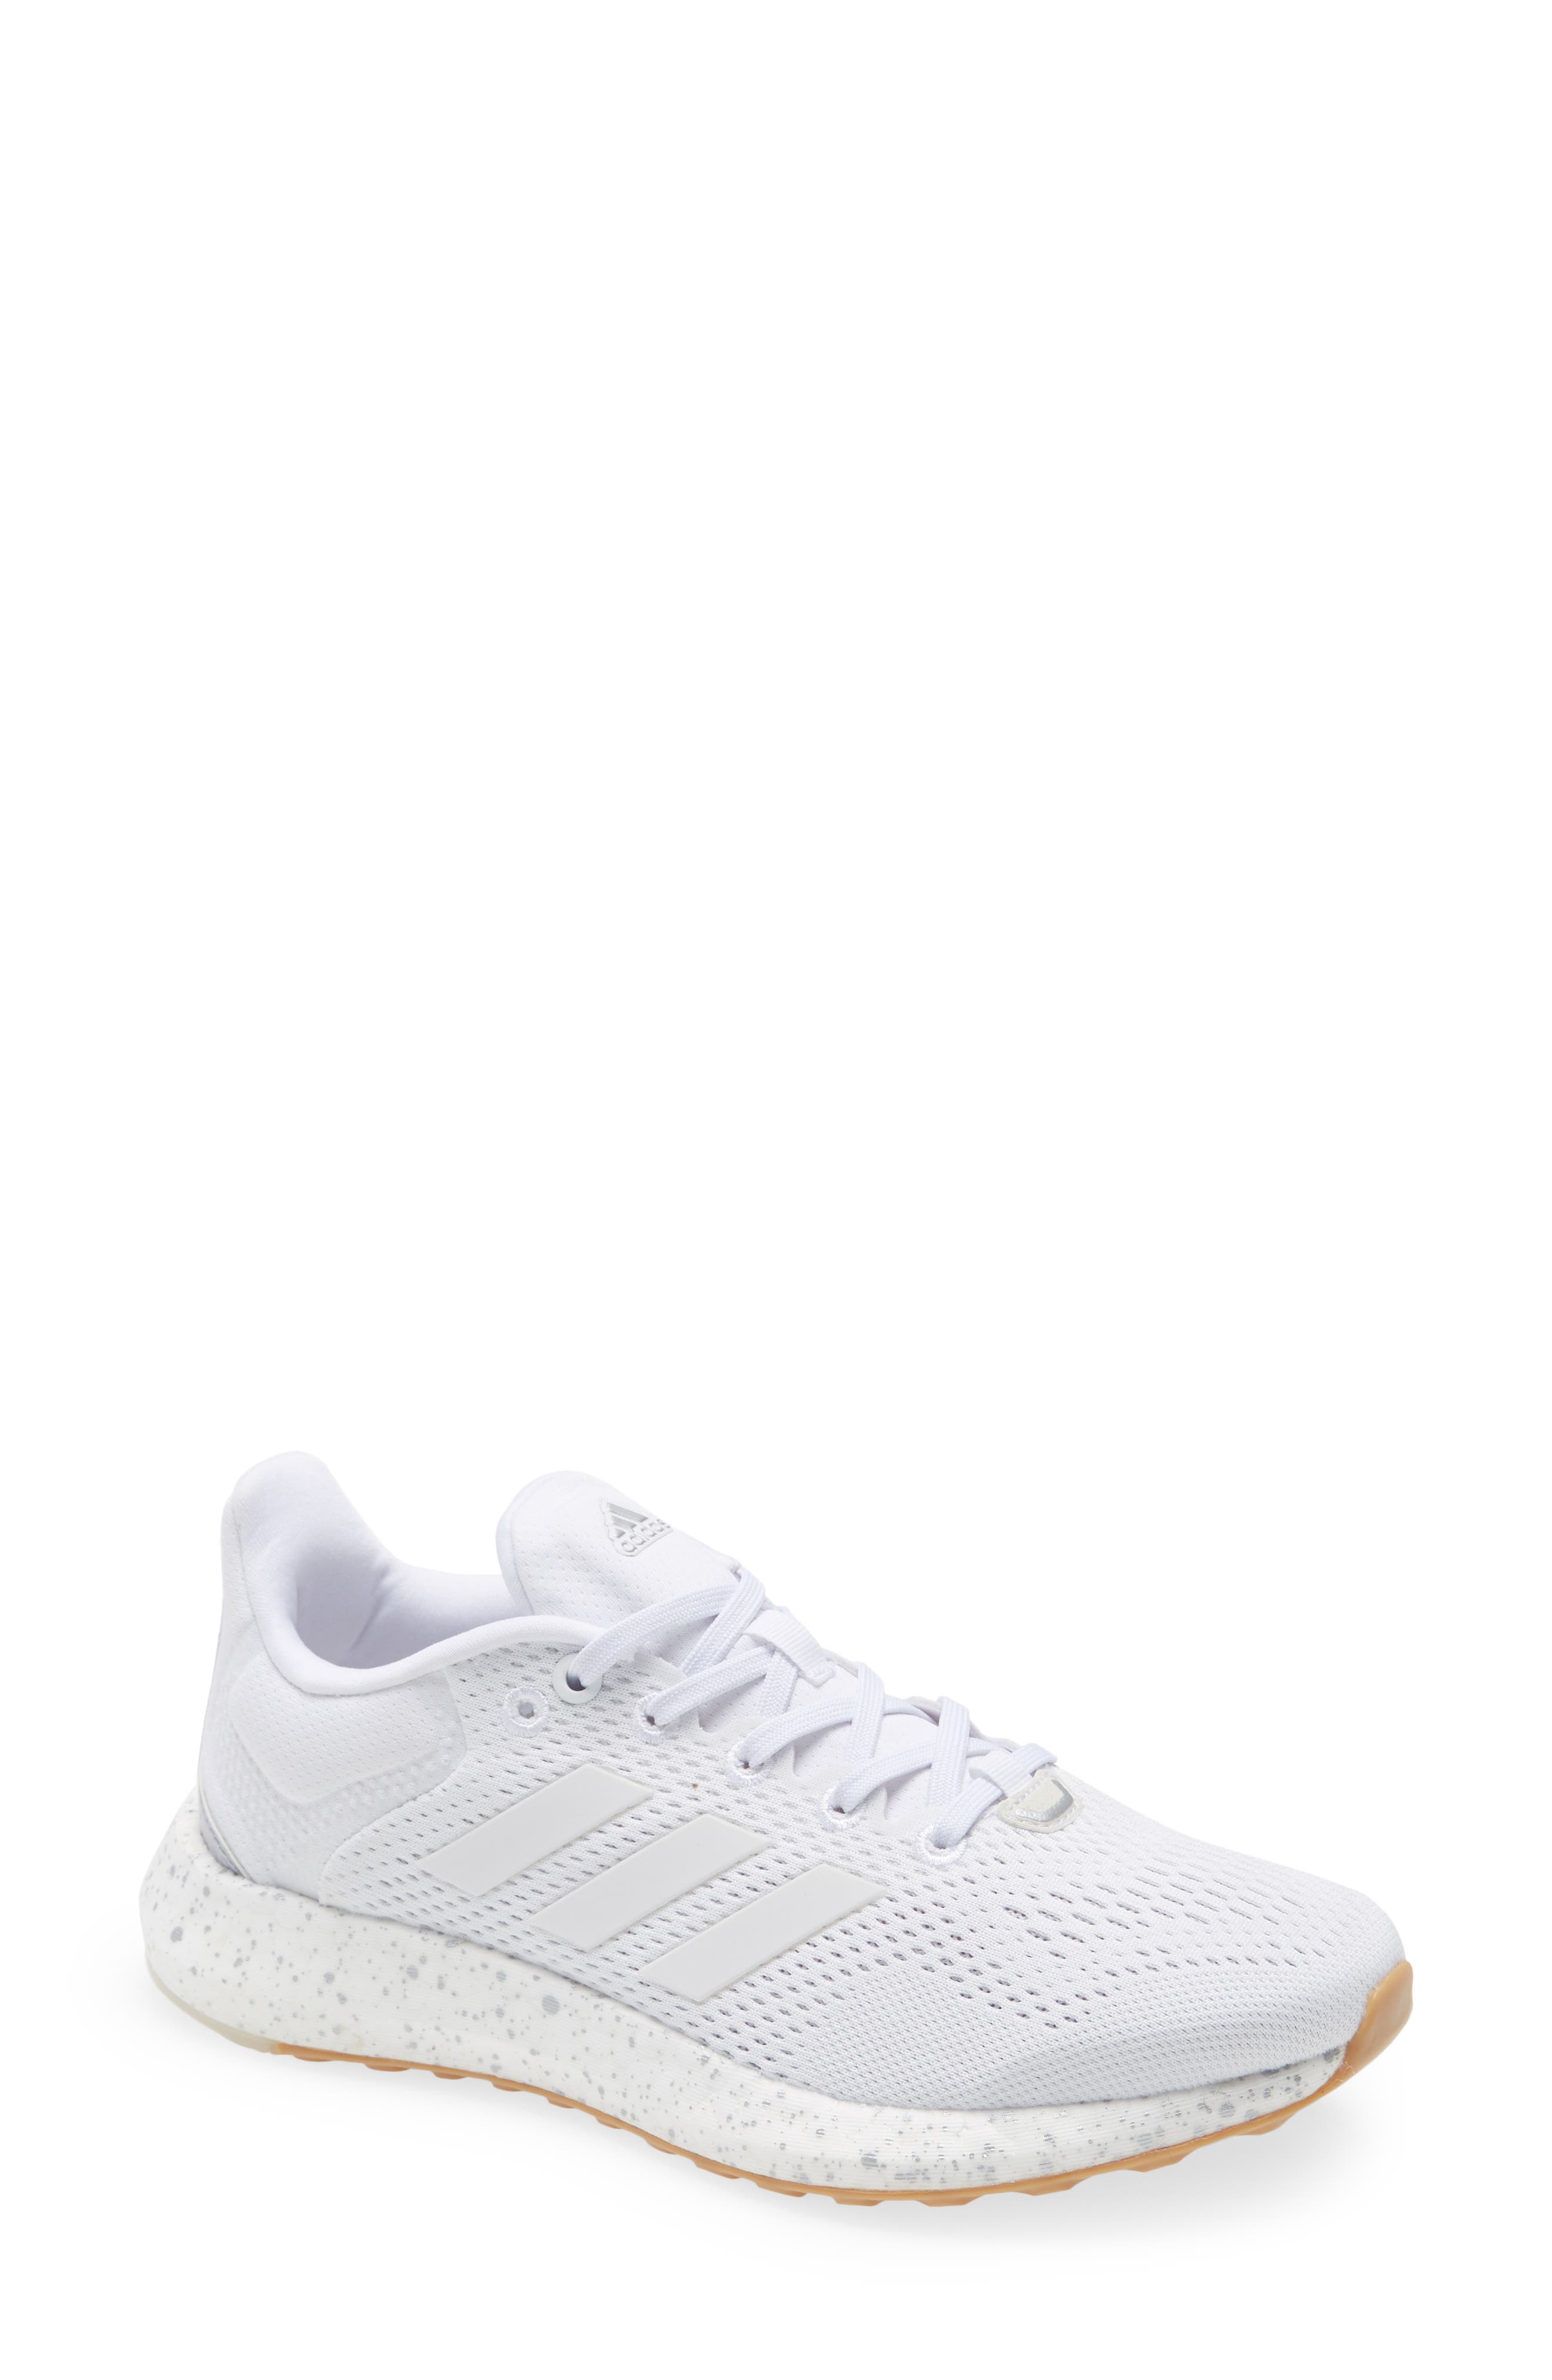 Women's White Athletic Shoes | Nordstrom